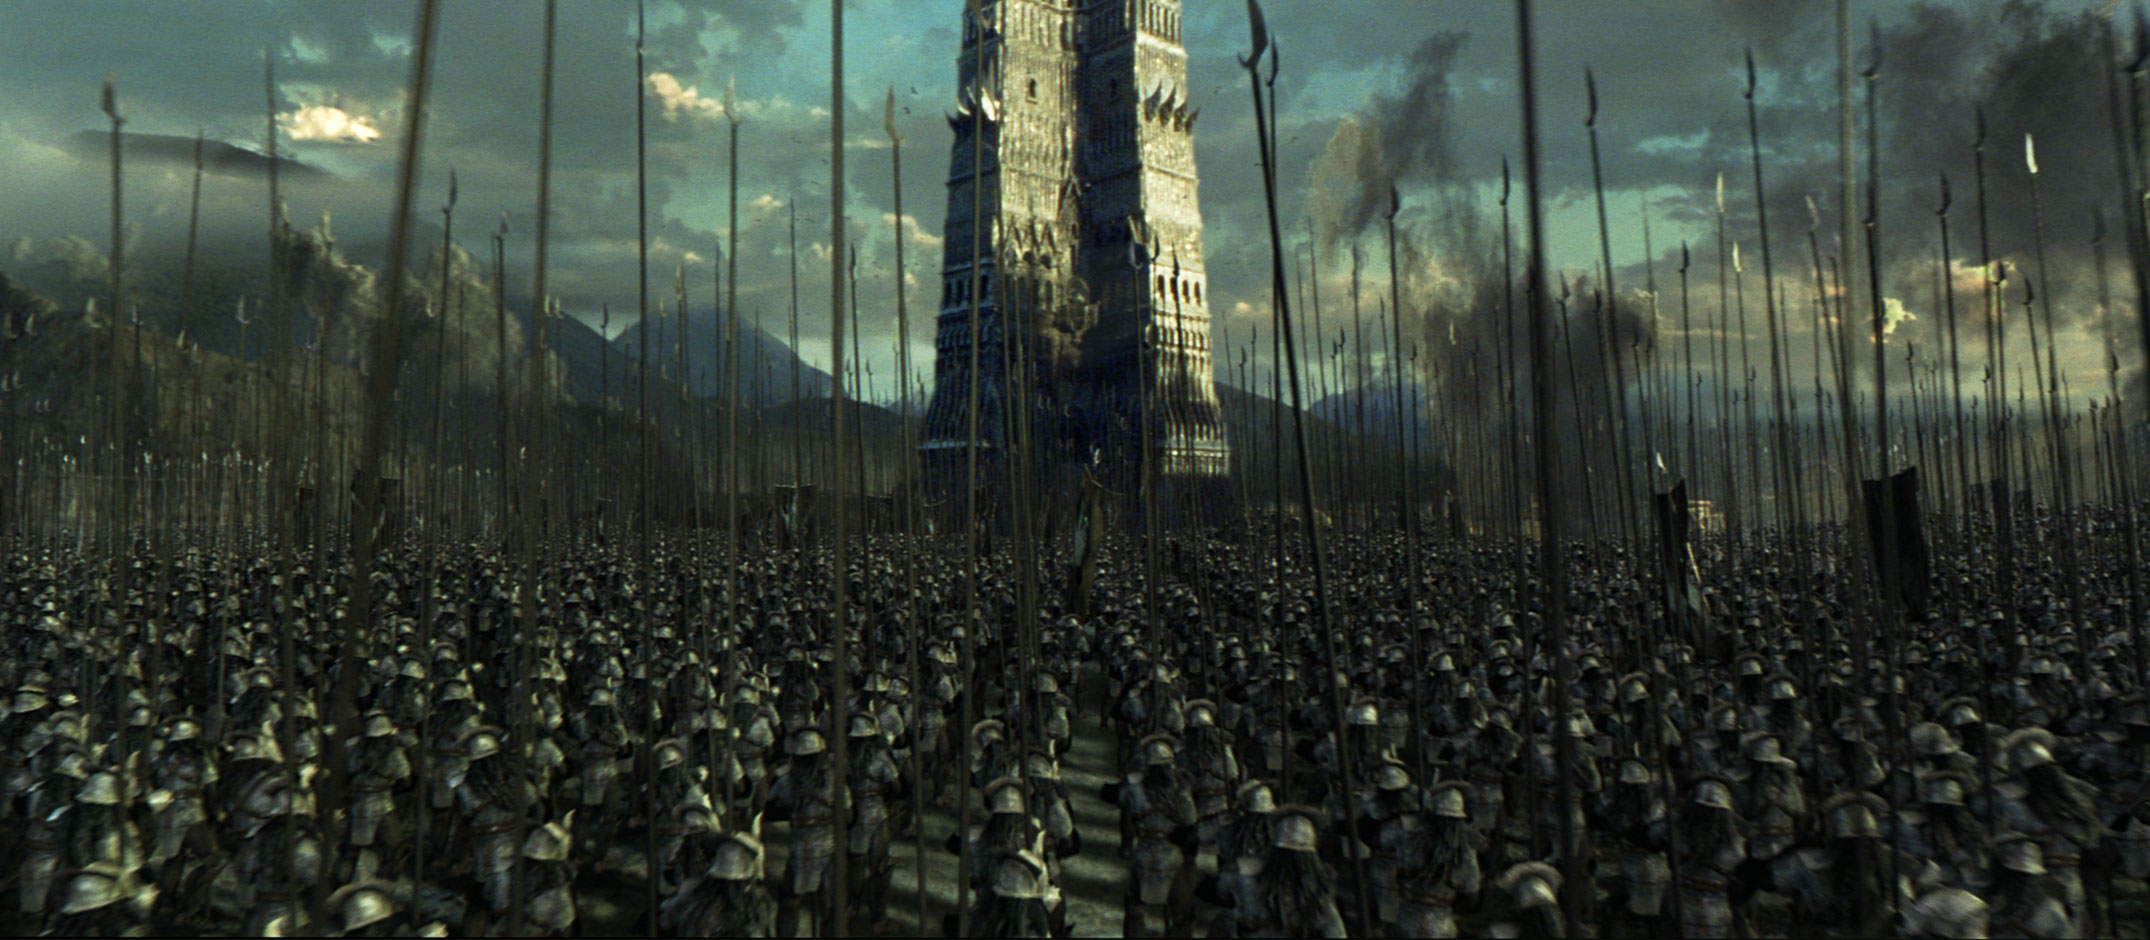 Lord of the Rings: The Two Towers winning a Visual Effects Oscar® 